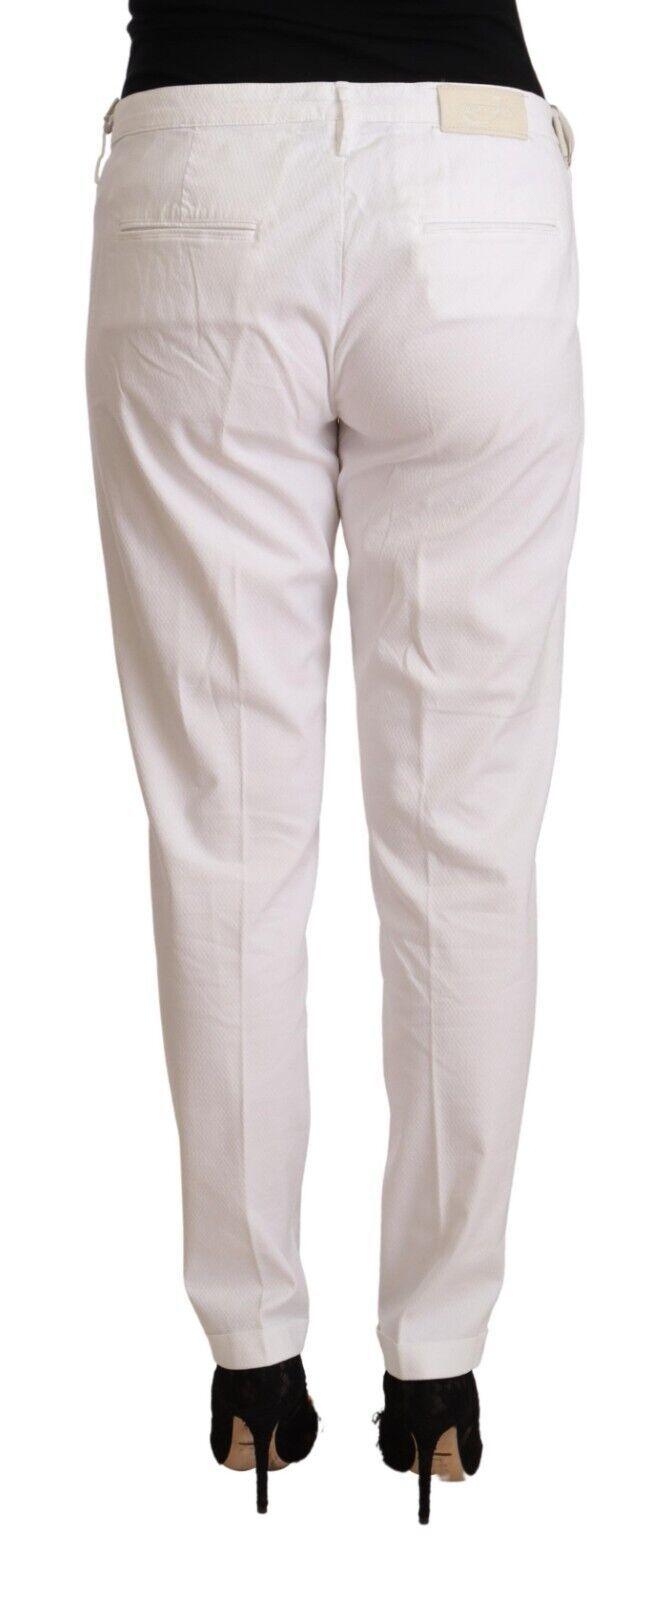 Jacob Cohen Women's White Mid Waist Tapered Birgitte Pants - Designed by Jacob Cohen Available to Buy at a Discounted Price on Moon Behind The Hill Online Designer Discount Store